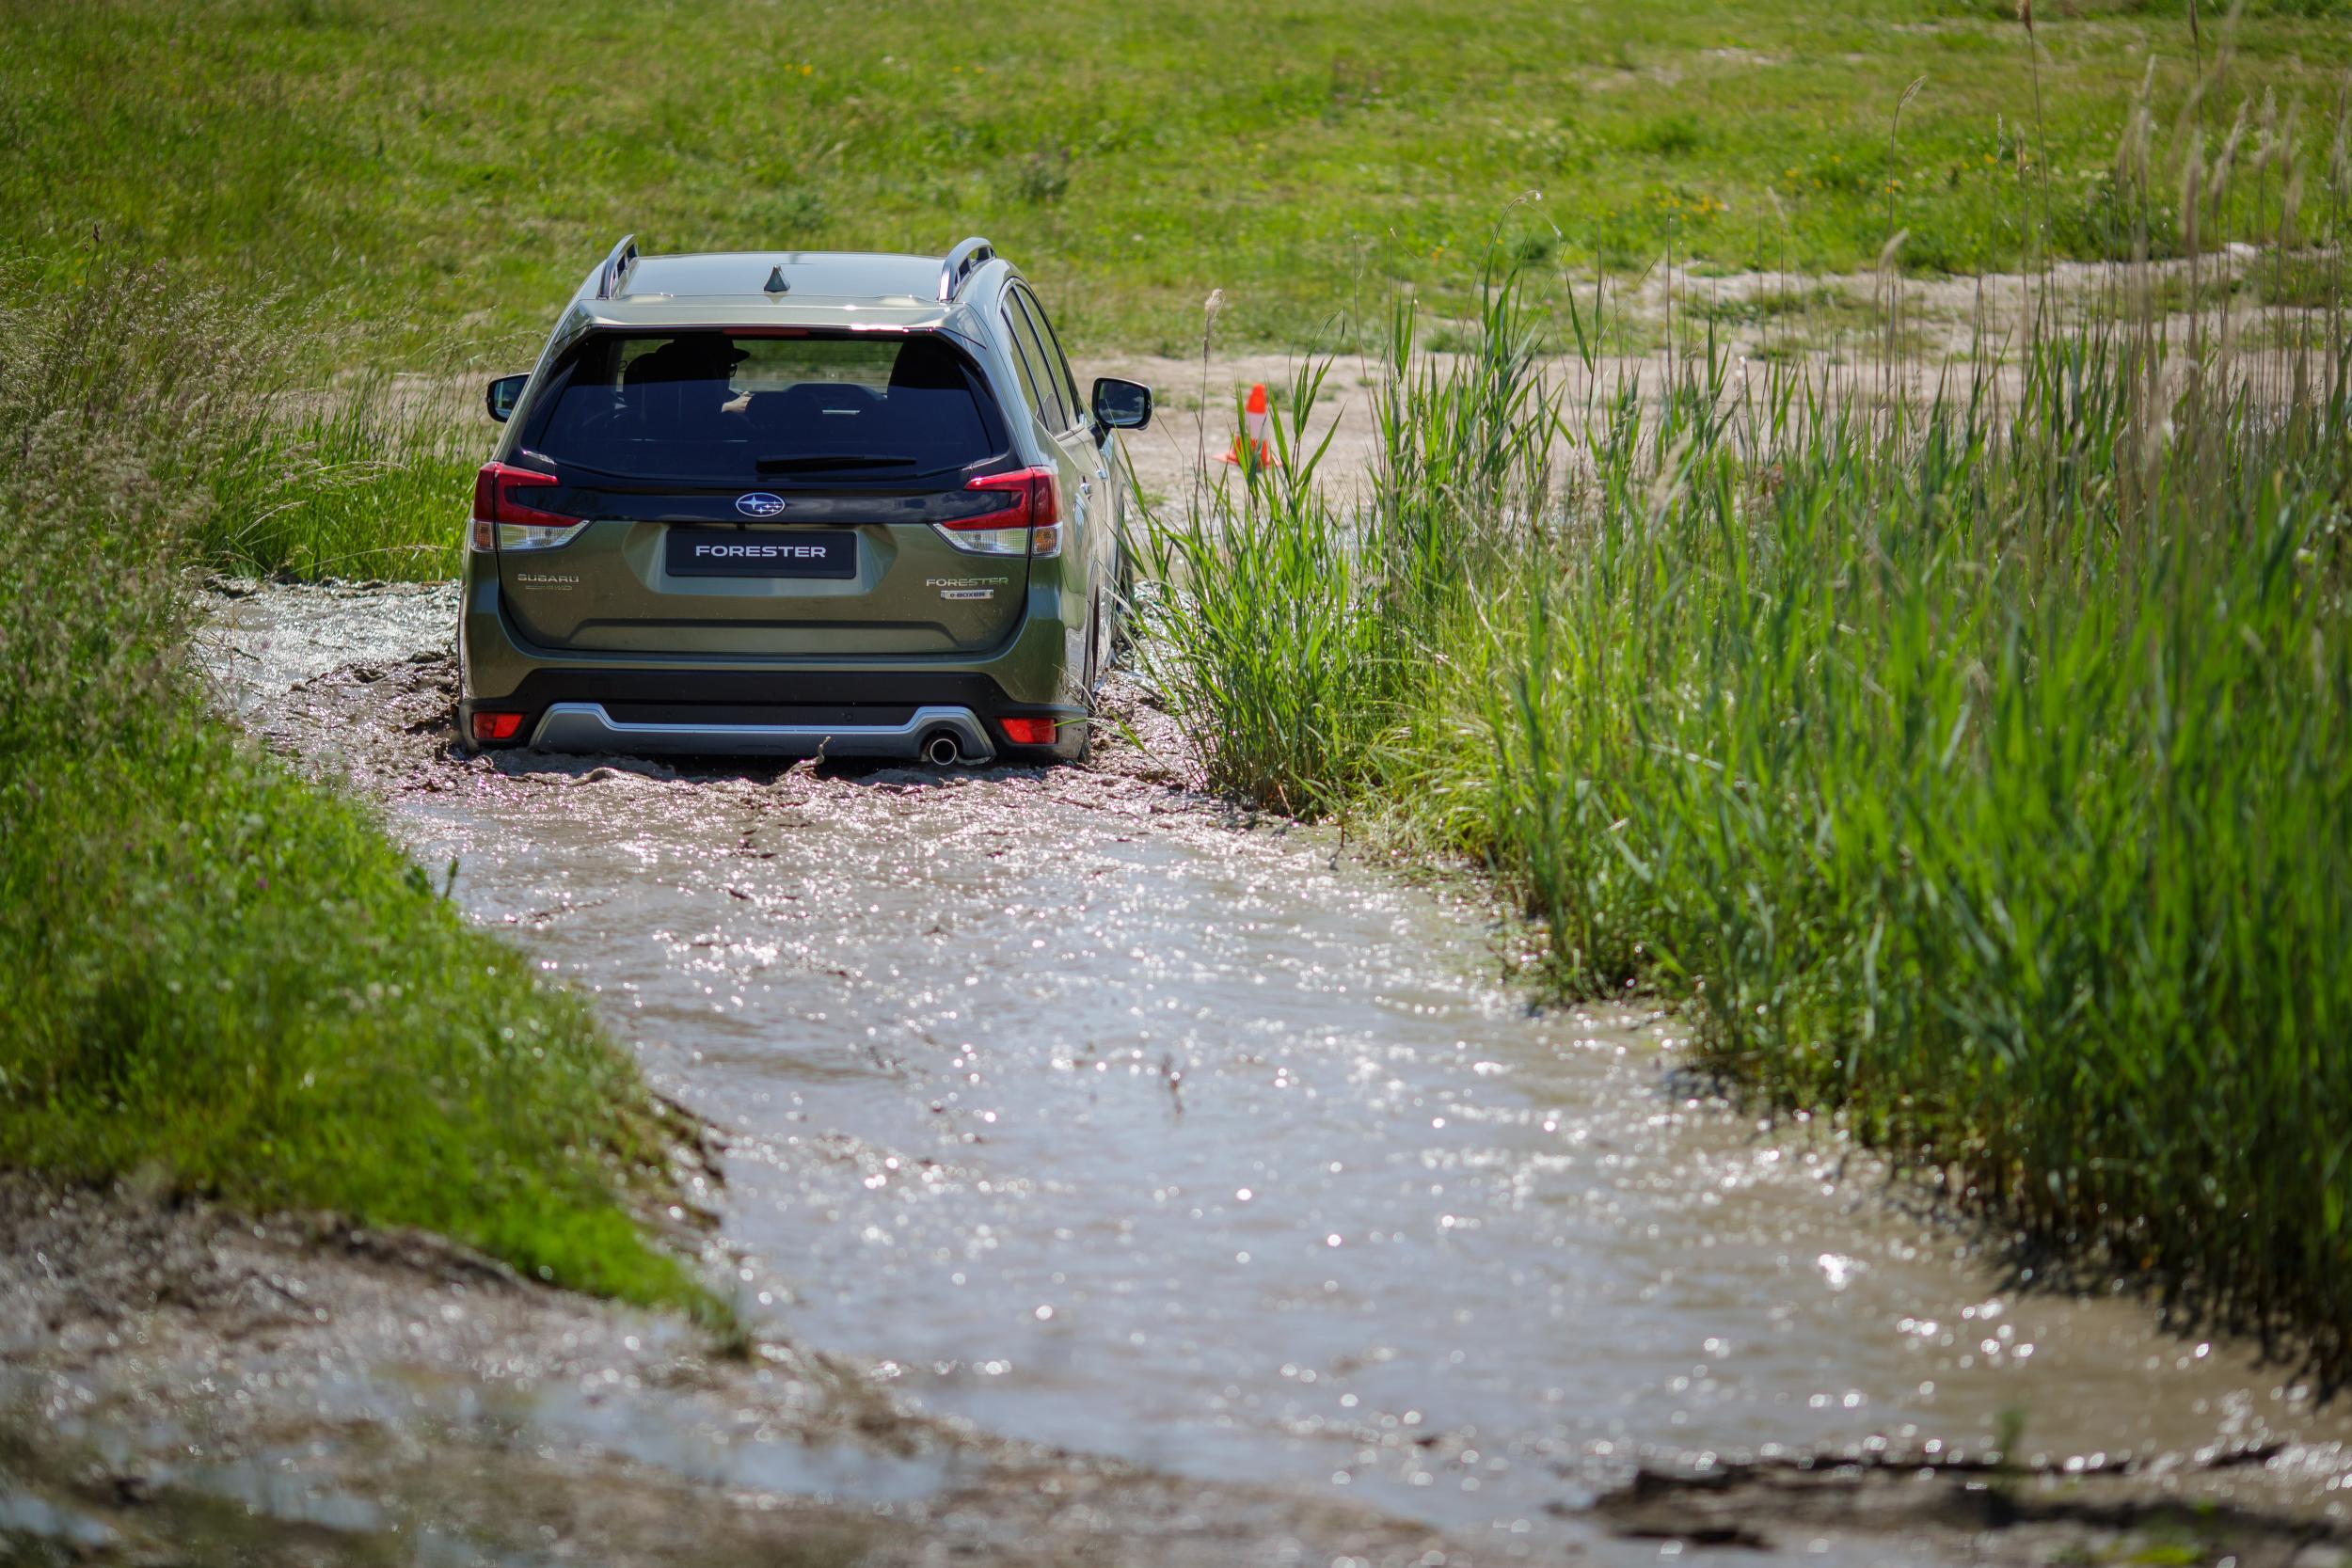 Car review: The Subaru Forester – one for the green welly brigade